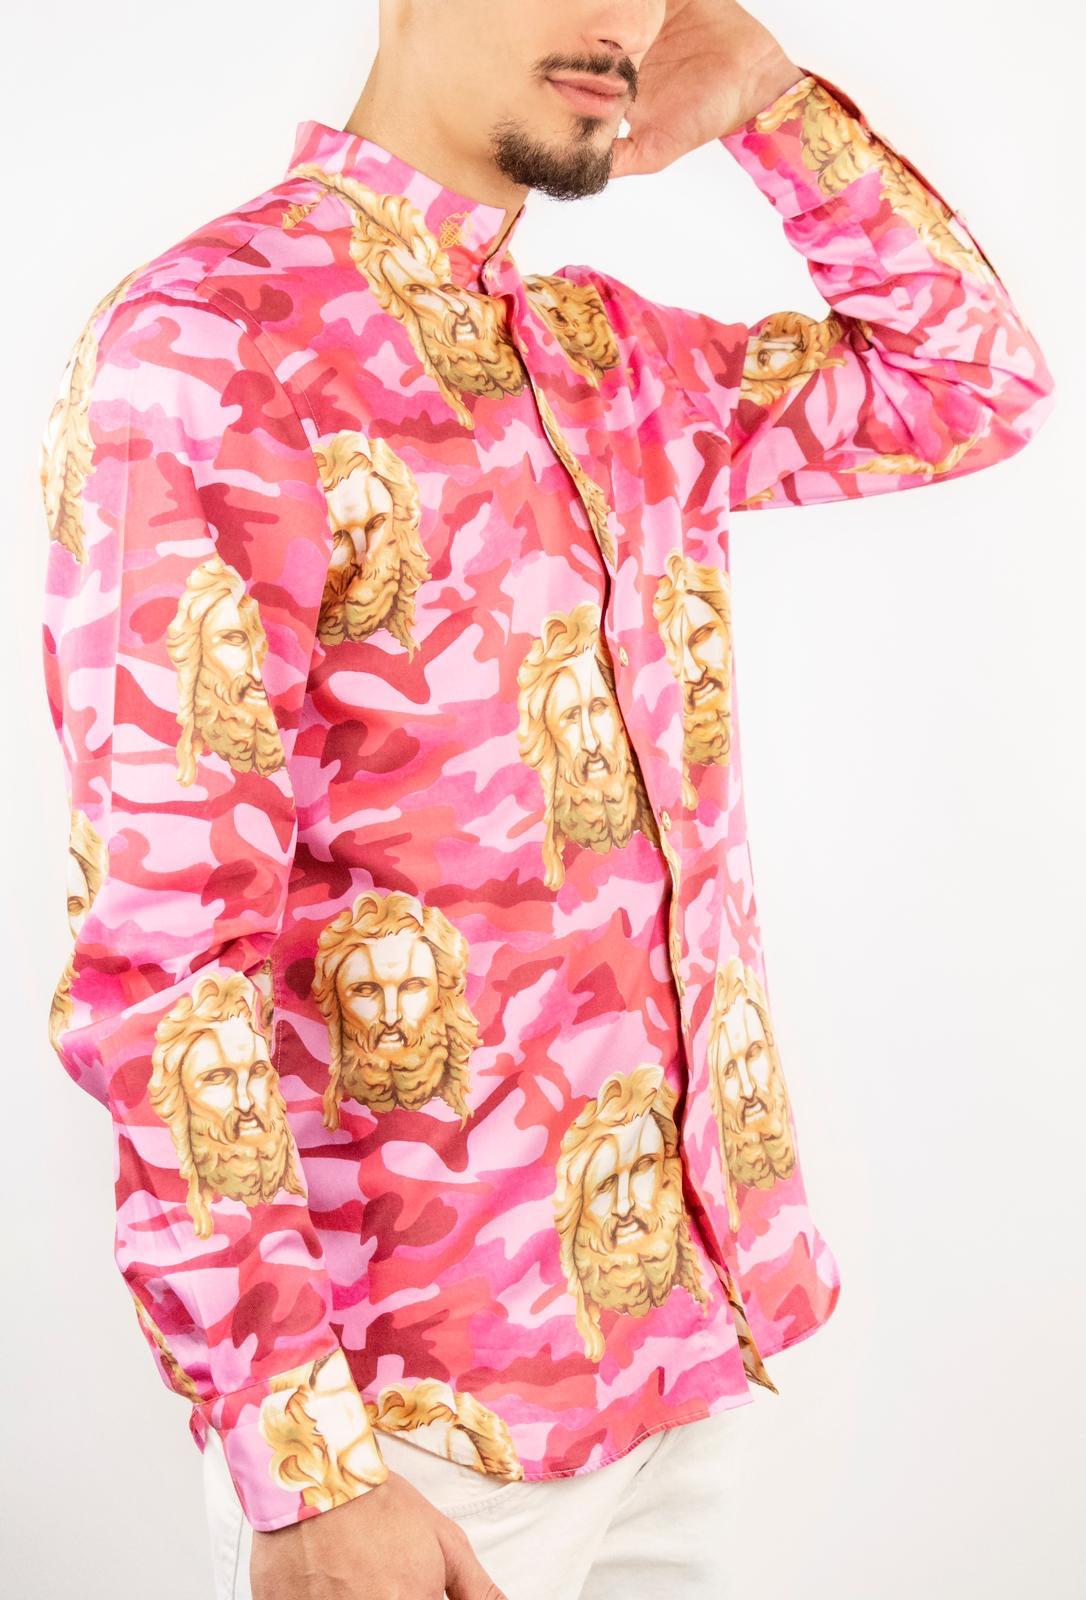 Pink multicoloured Zeus shirt NWOT
Totally made in italy
Size available: from M to XL